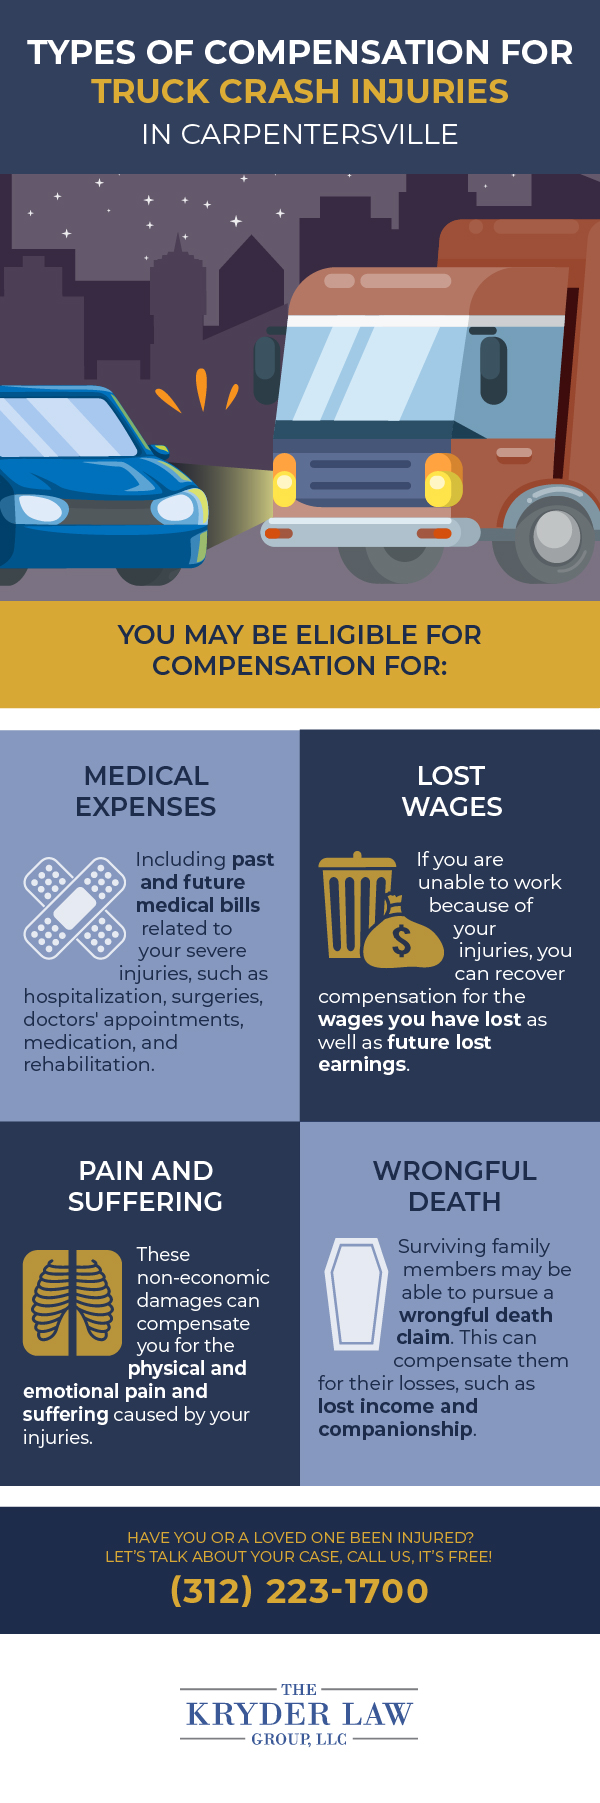 The Benefits of Hiring a Carpentersville Truck Accident Lawyer Infographic